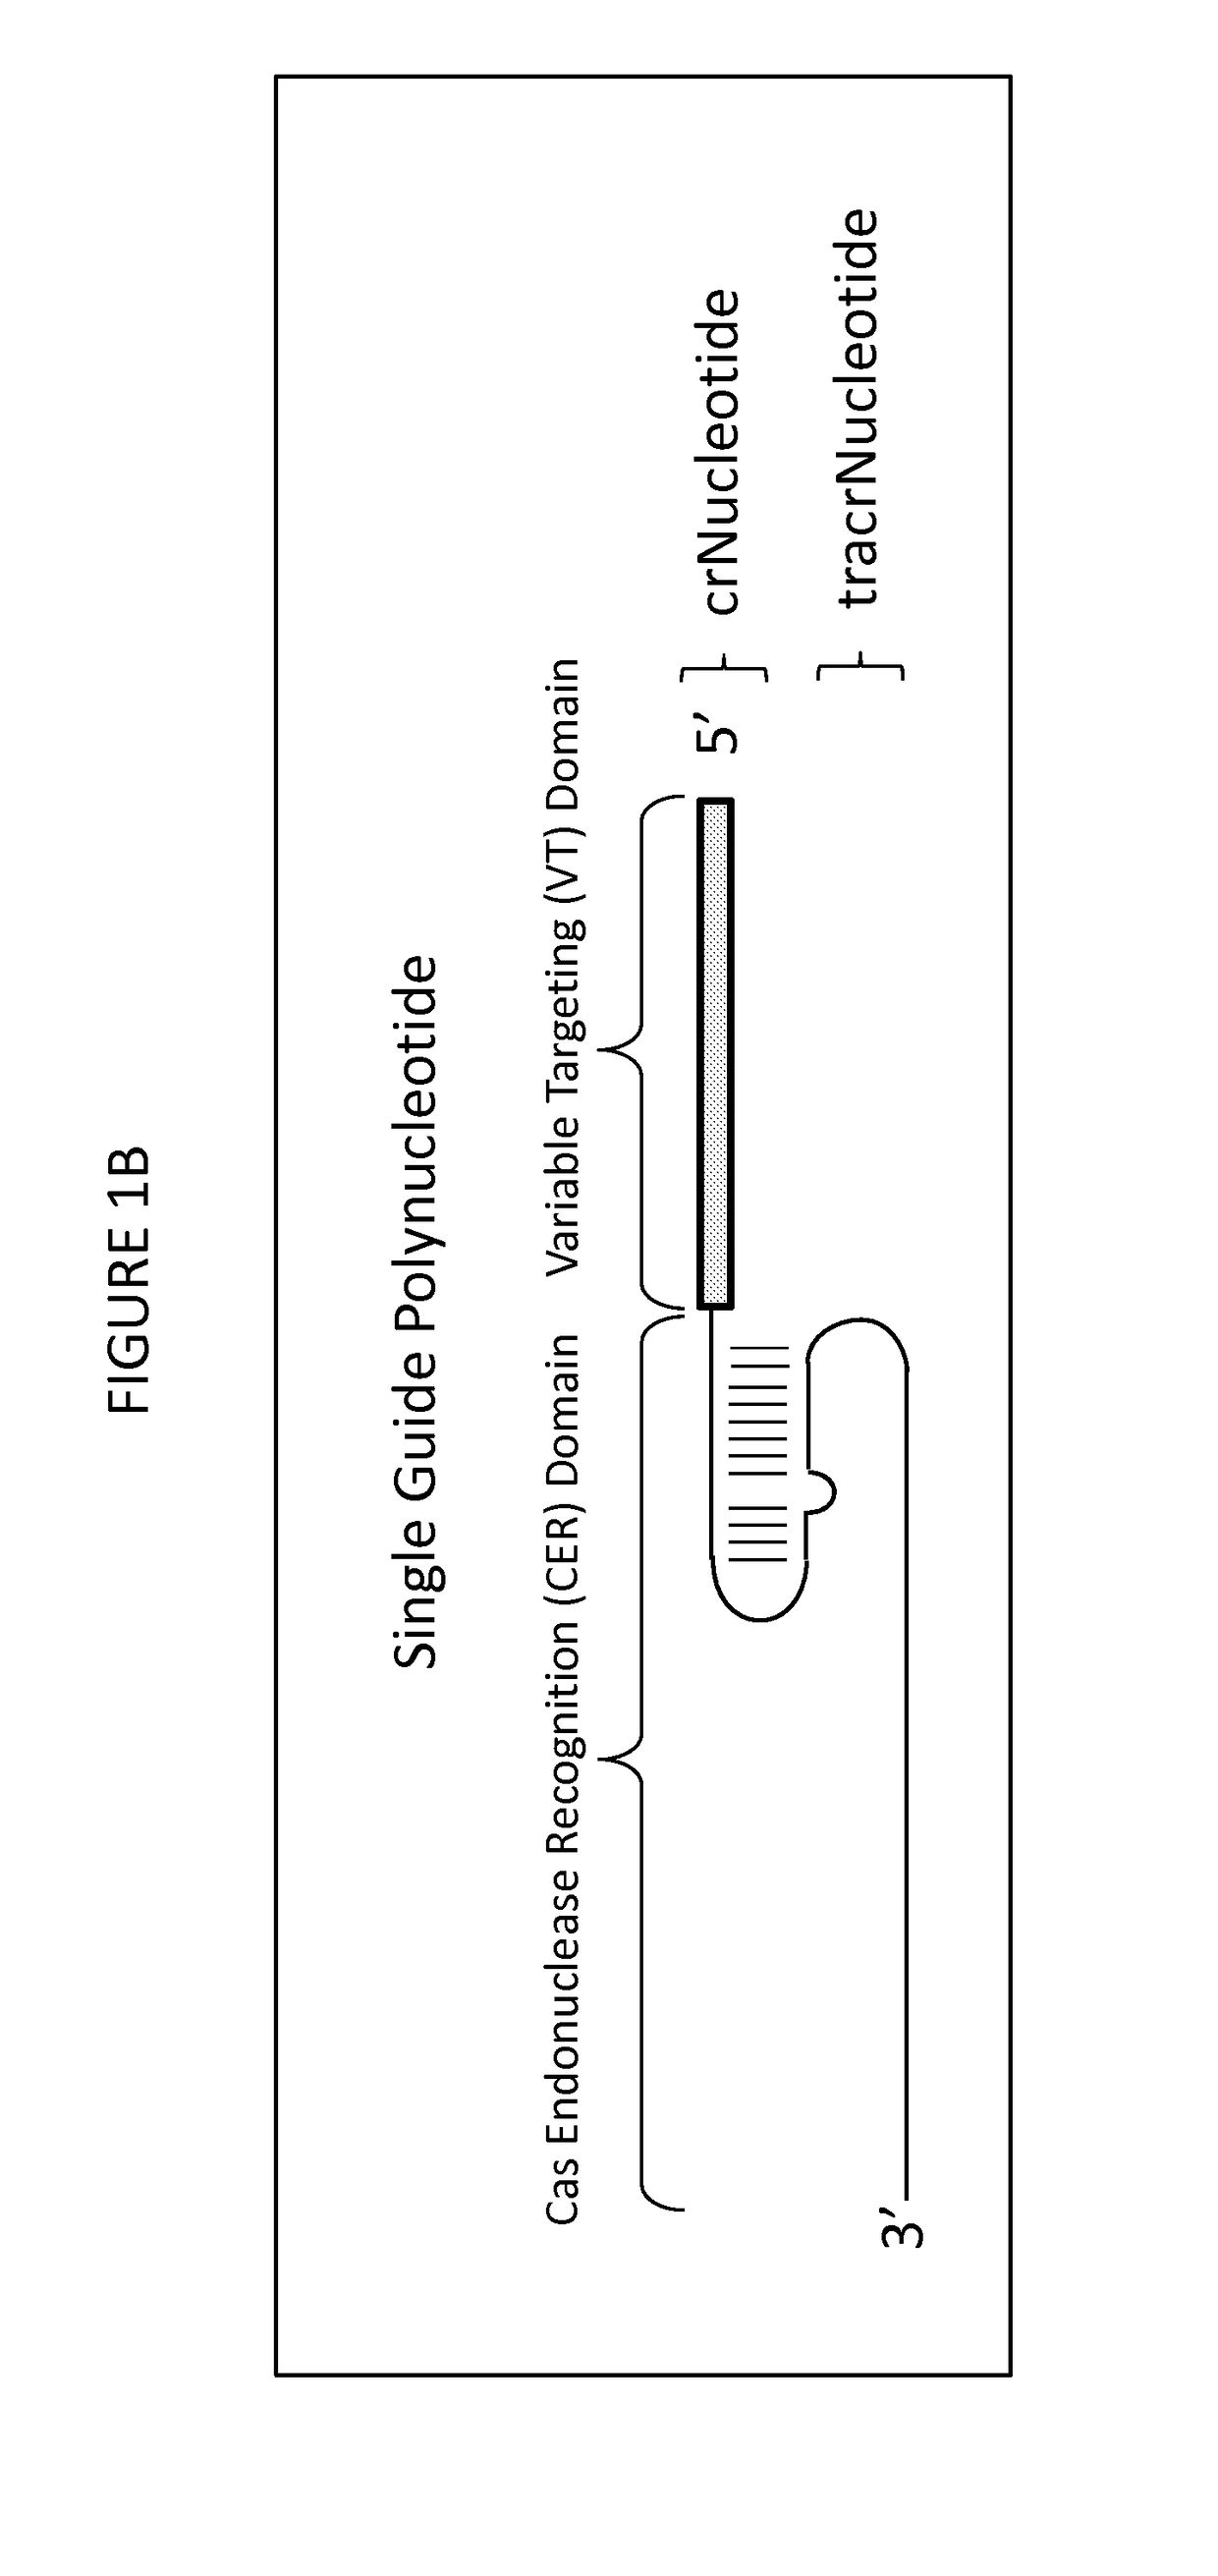 Compositions and methods for producing plants resistant to glyphosate herbicide